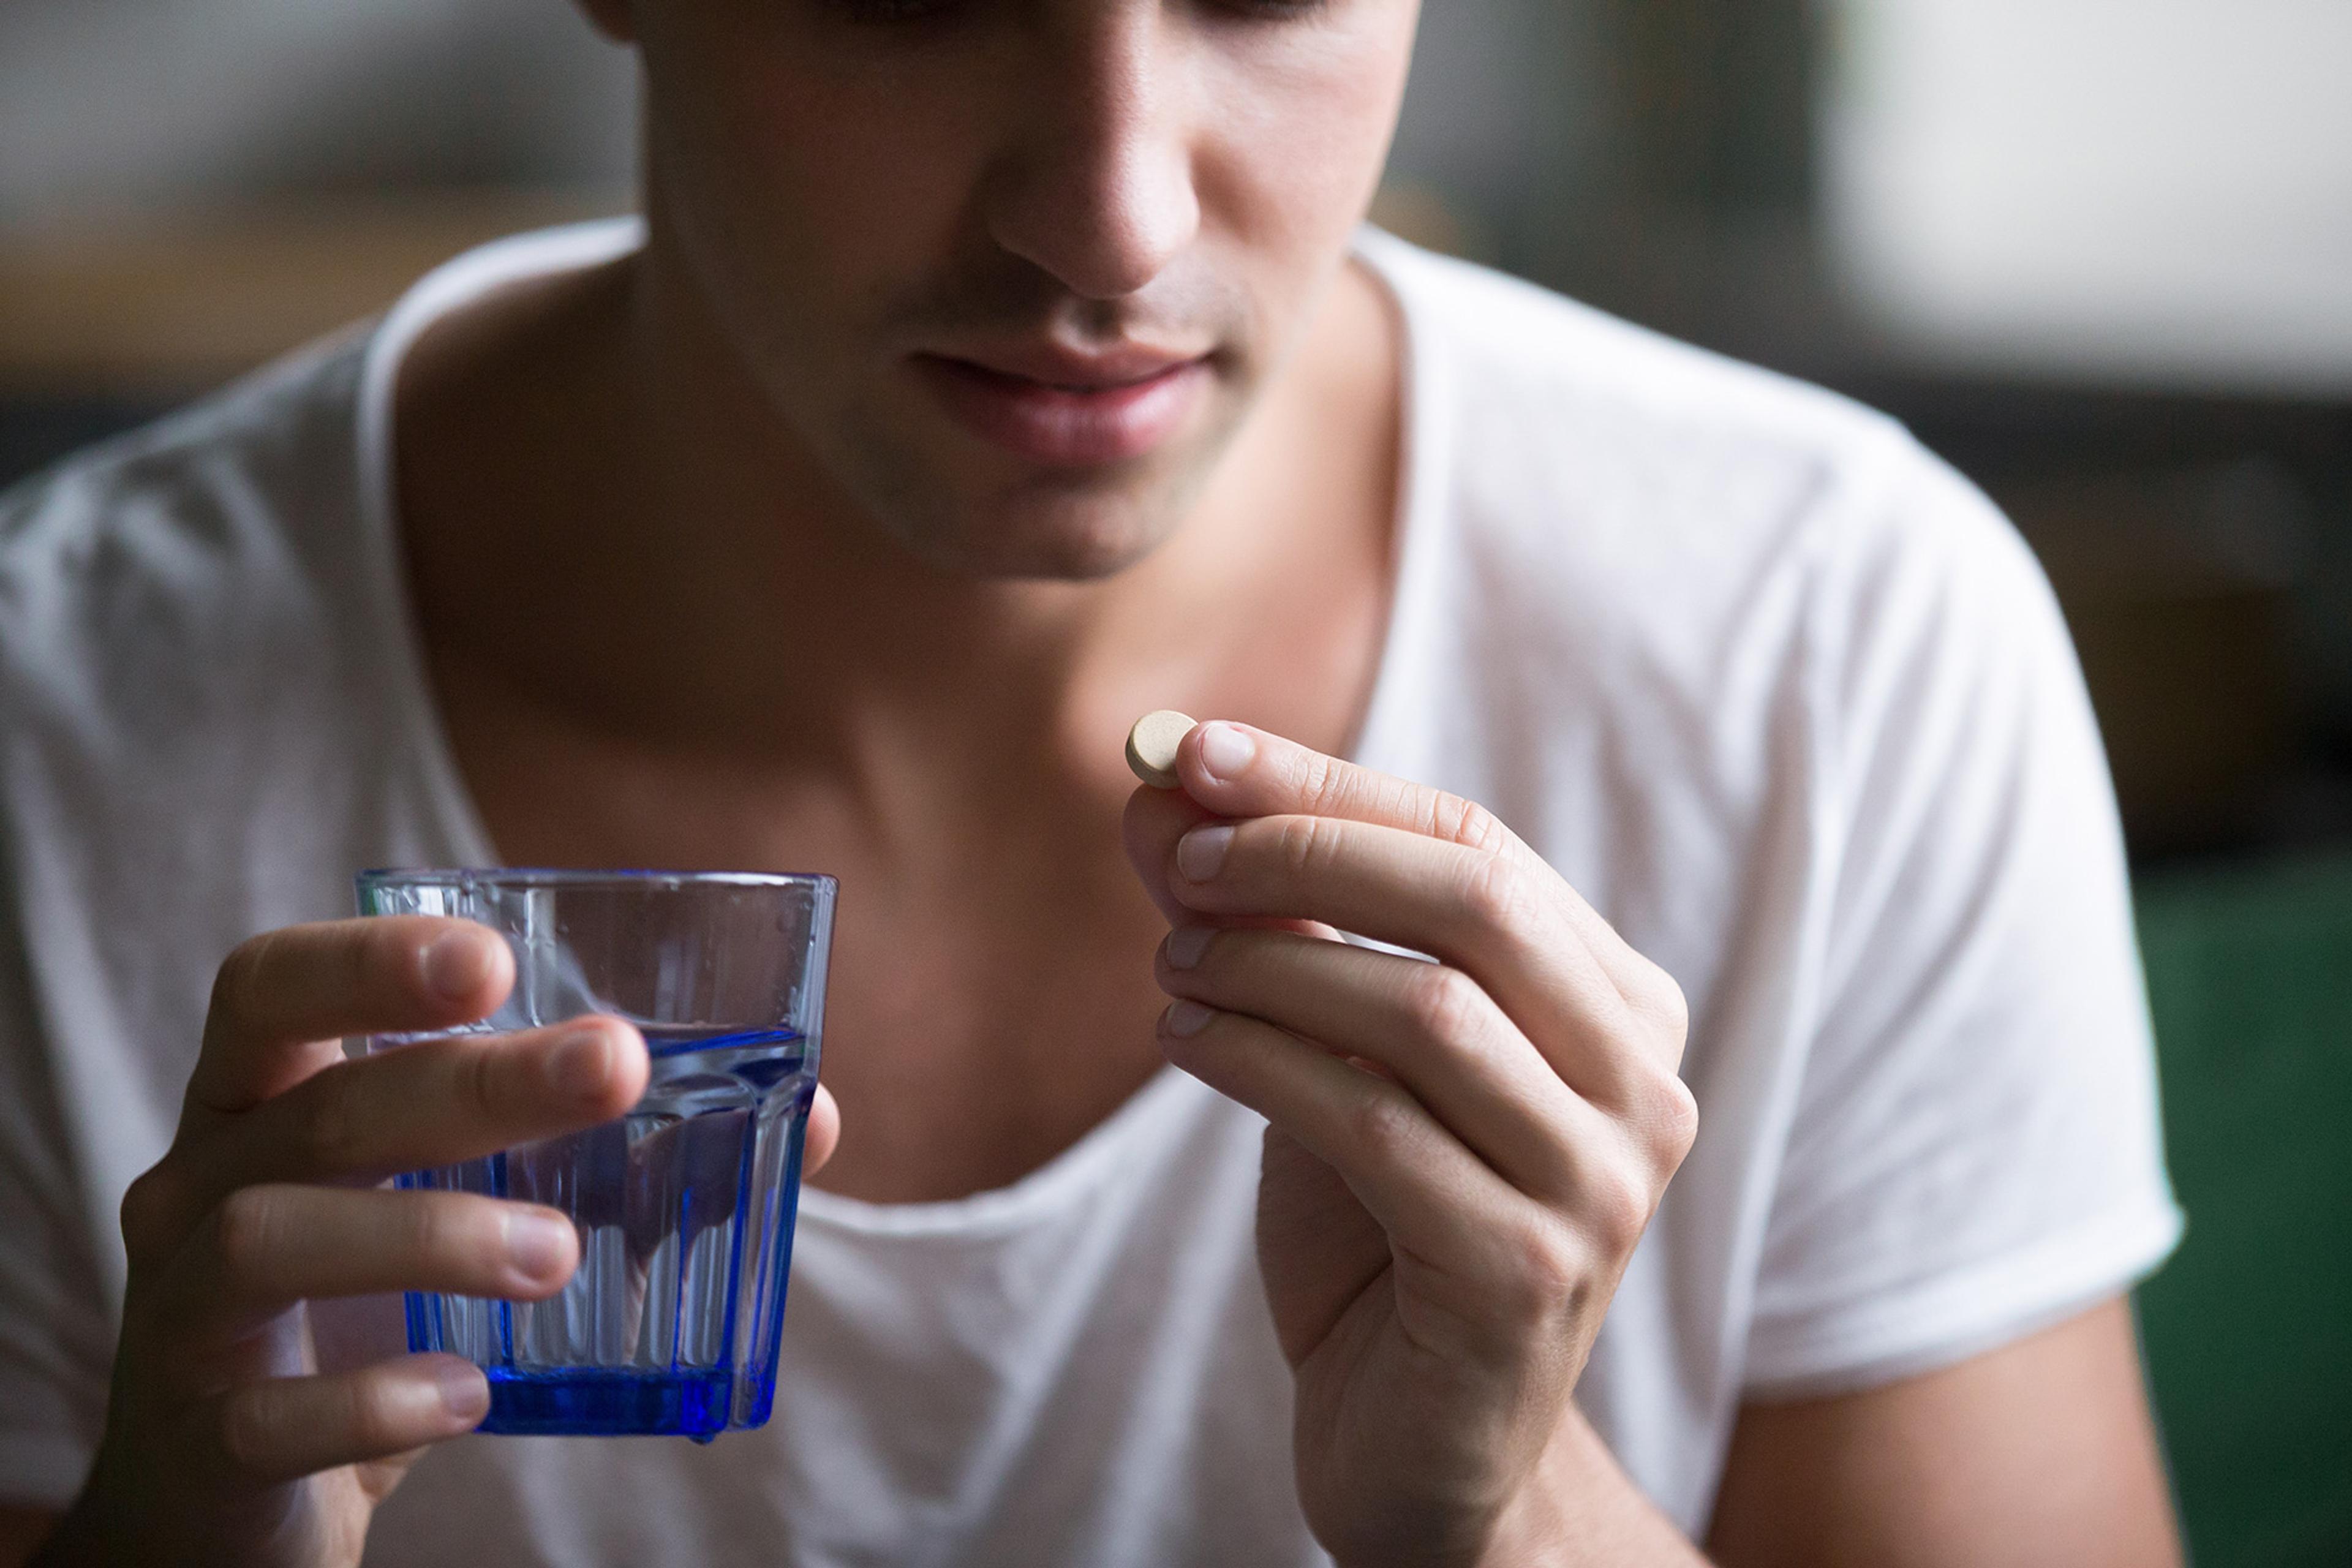 Young man holding glass of water in one hand and pill in the other, and examining the pill intently.